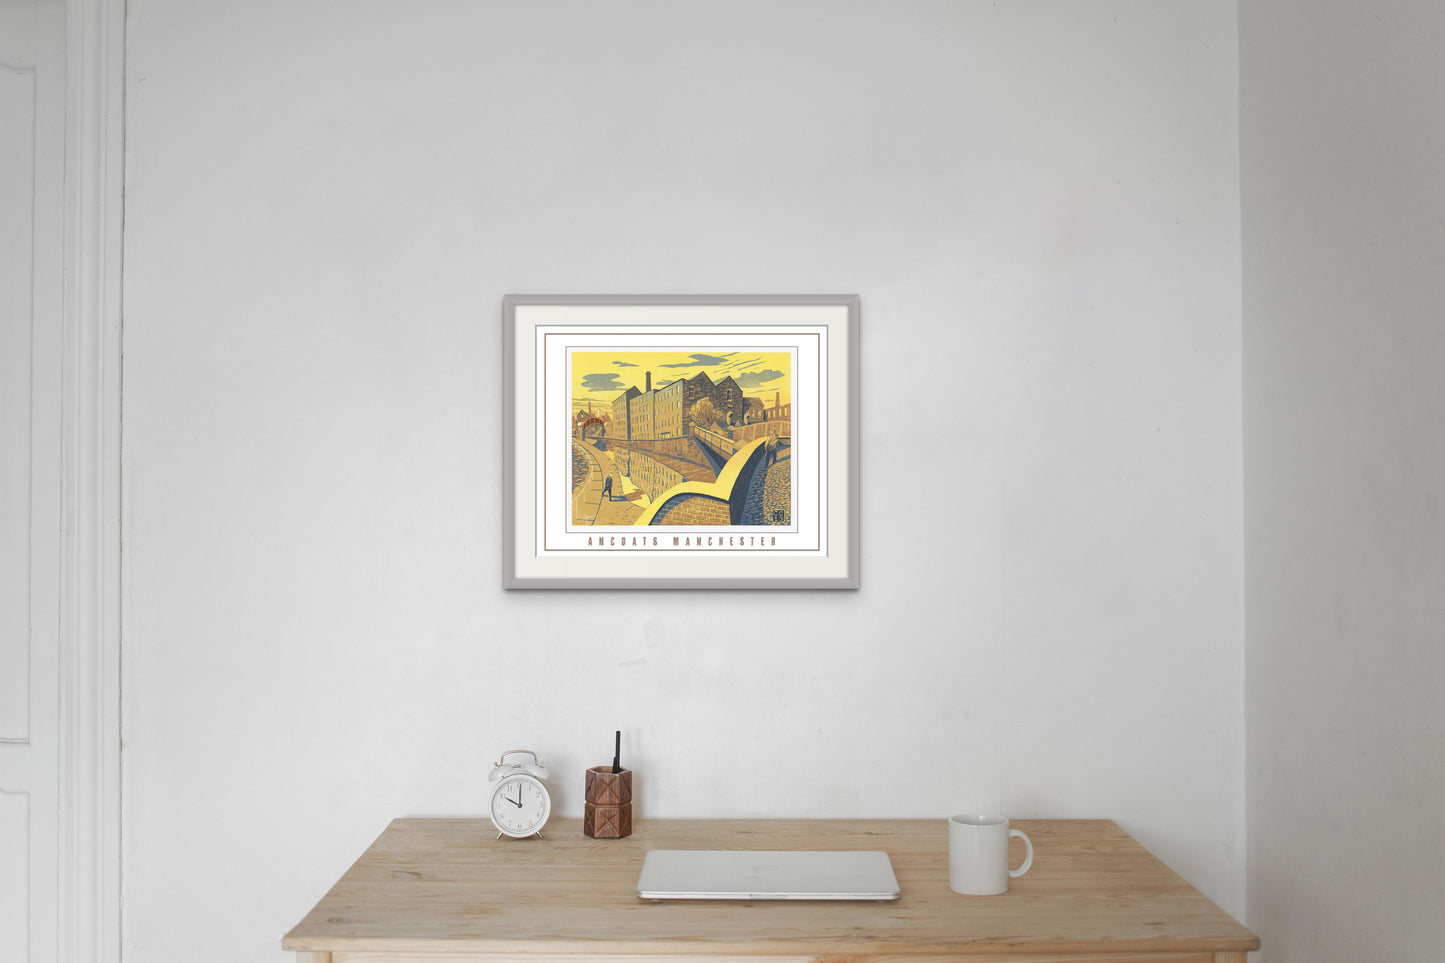 Special Edition Poster Print of a scene featuring Ancoats, Manchester by famous artist Chris Cyprus. The image shows the poster in a frame hung on the wall. Size of Poster is A2. Supplied tube rolled for worldwide shipping